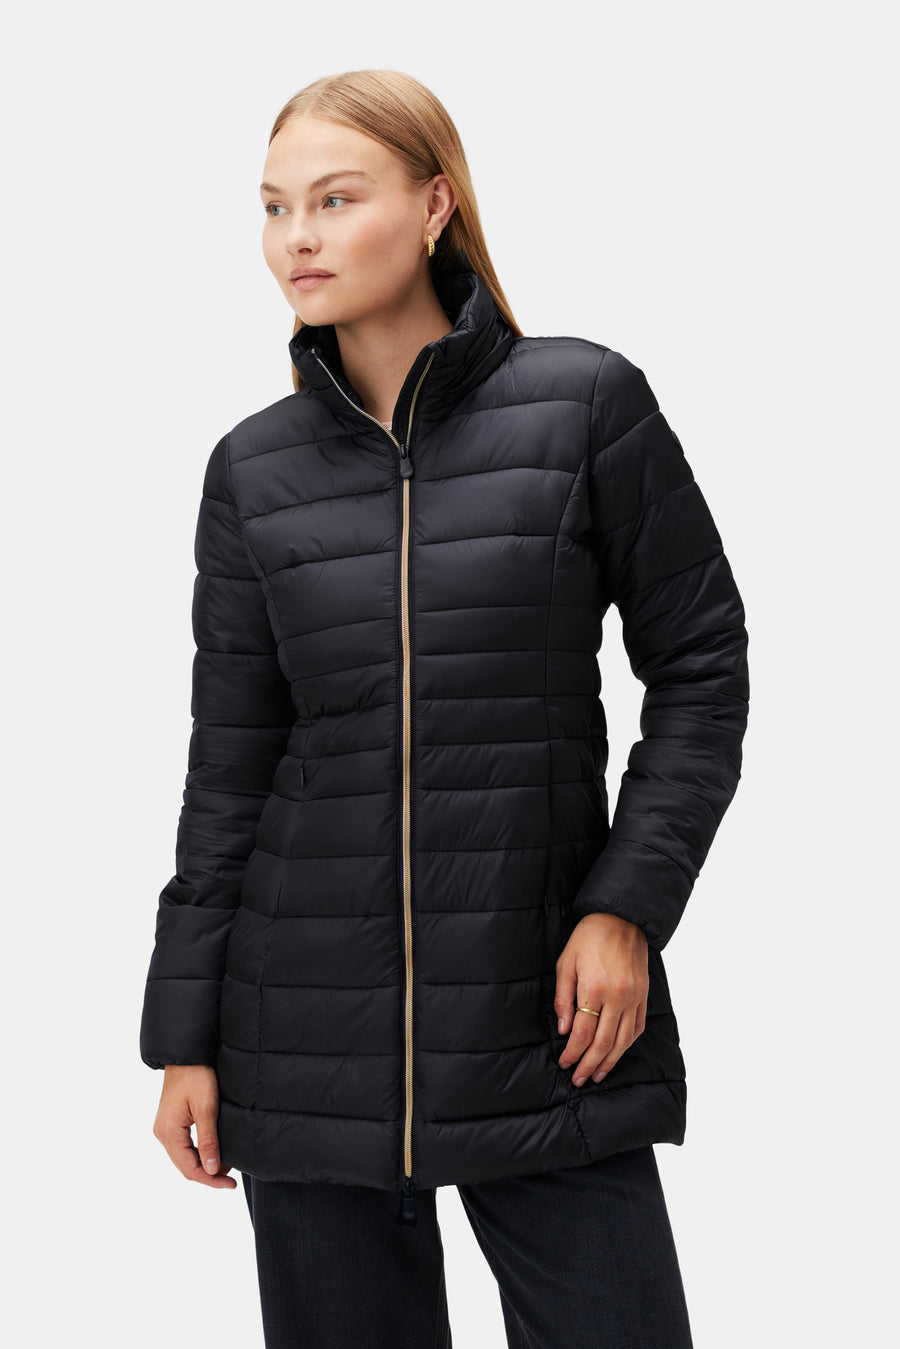 Save the Duck Reese Puffer Jacket - Black